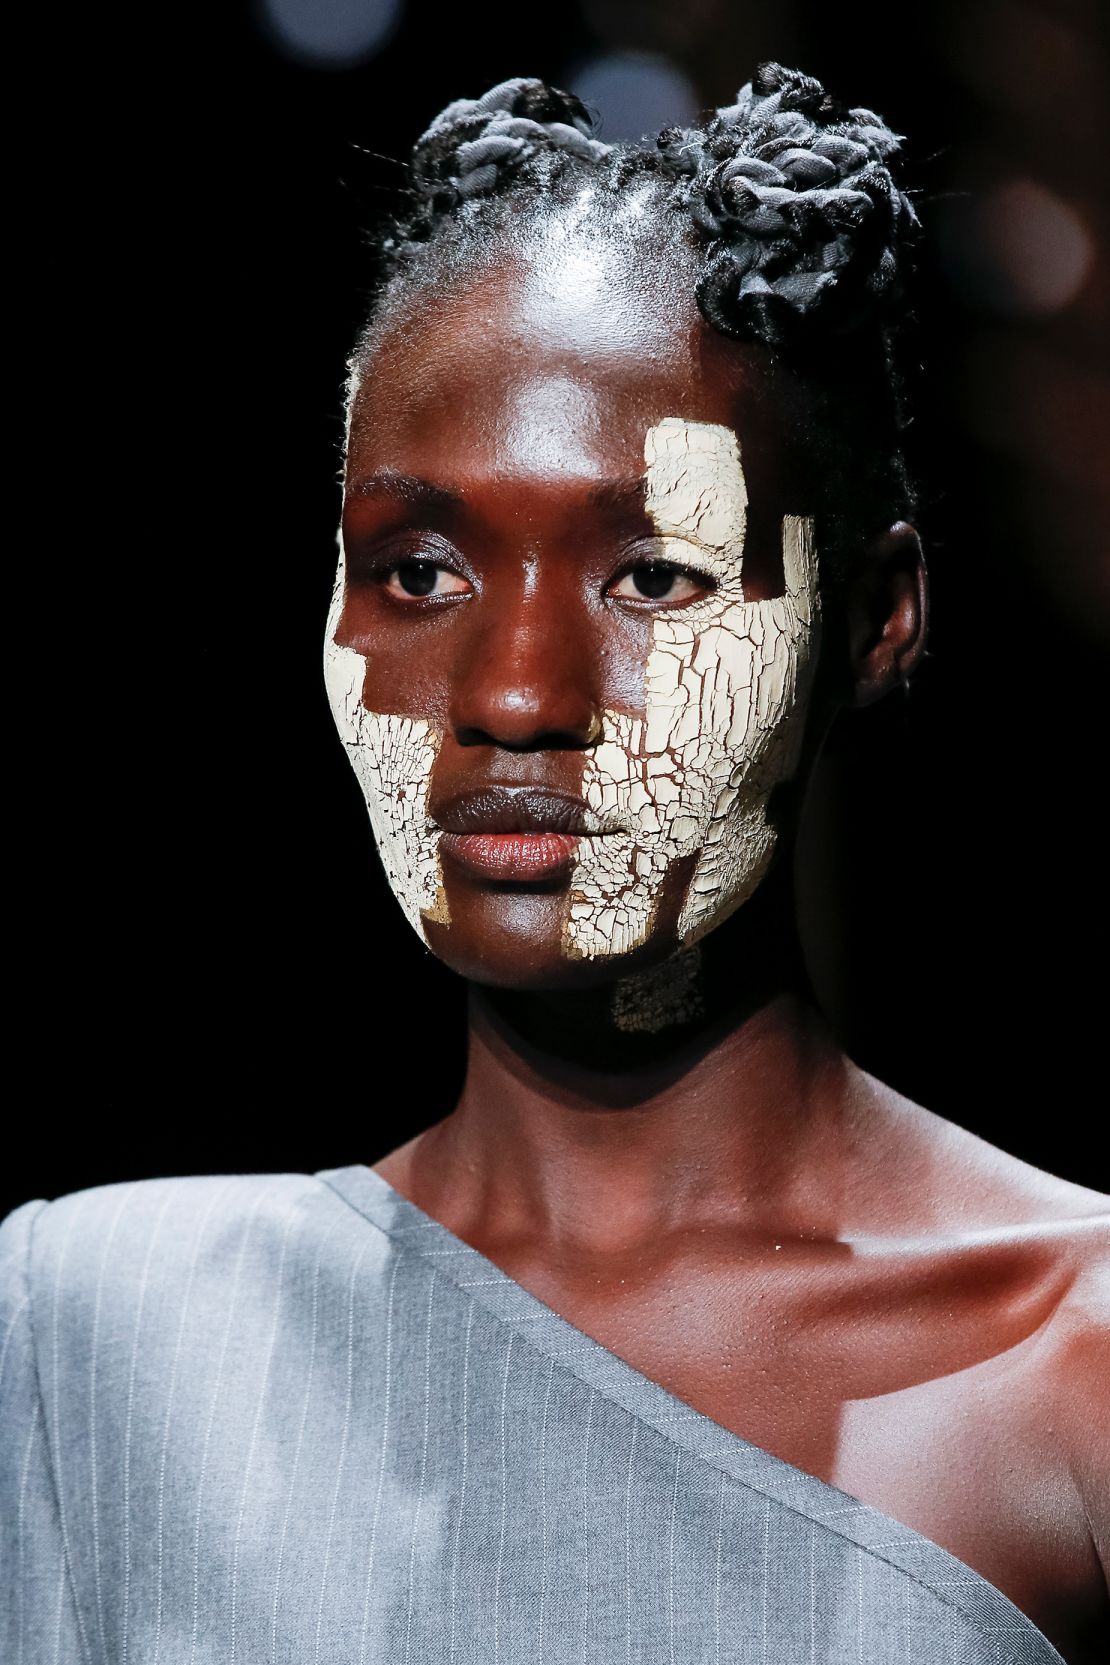 Cracking strokes of clay were brushed across models' faces at the Thom Browne show at New York Fashion Week in 2021.